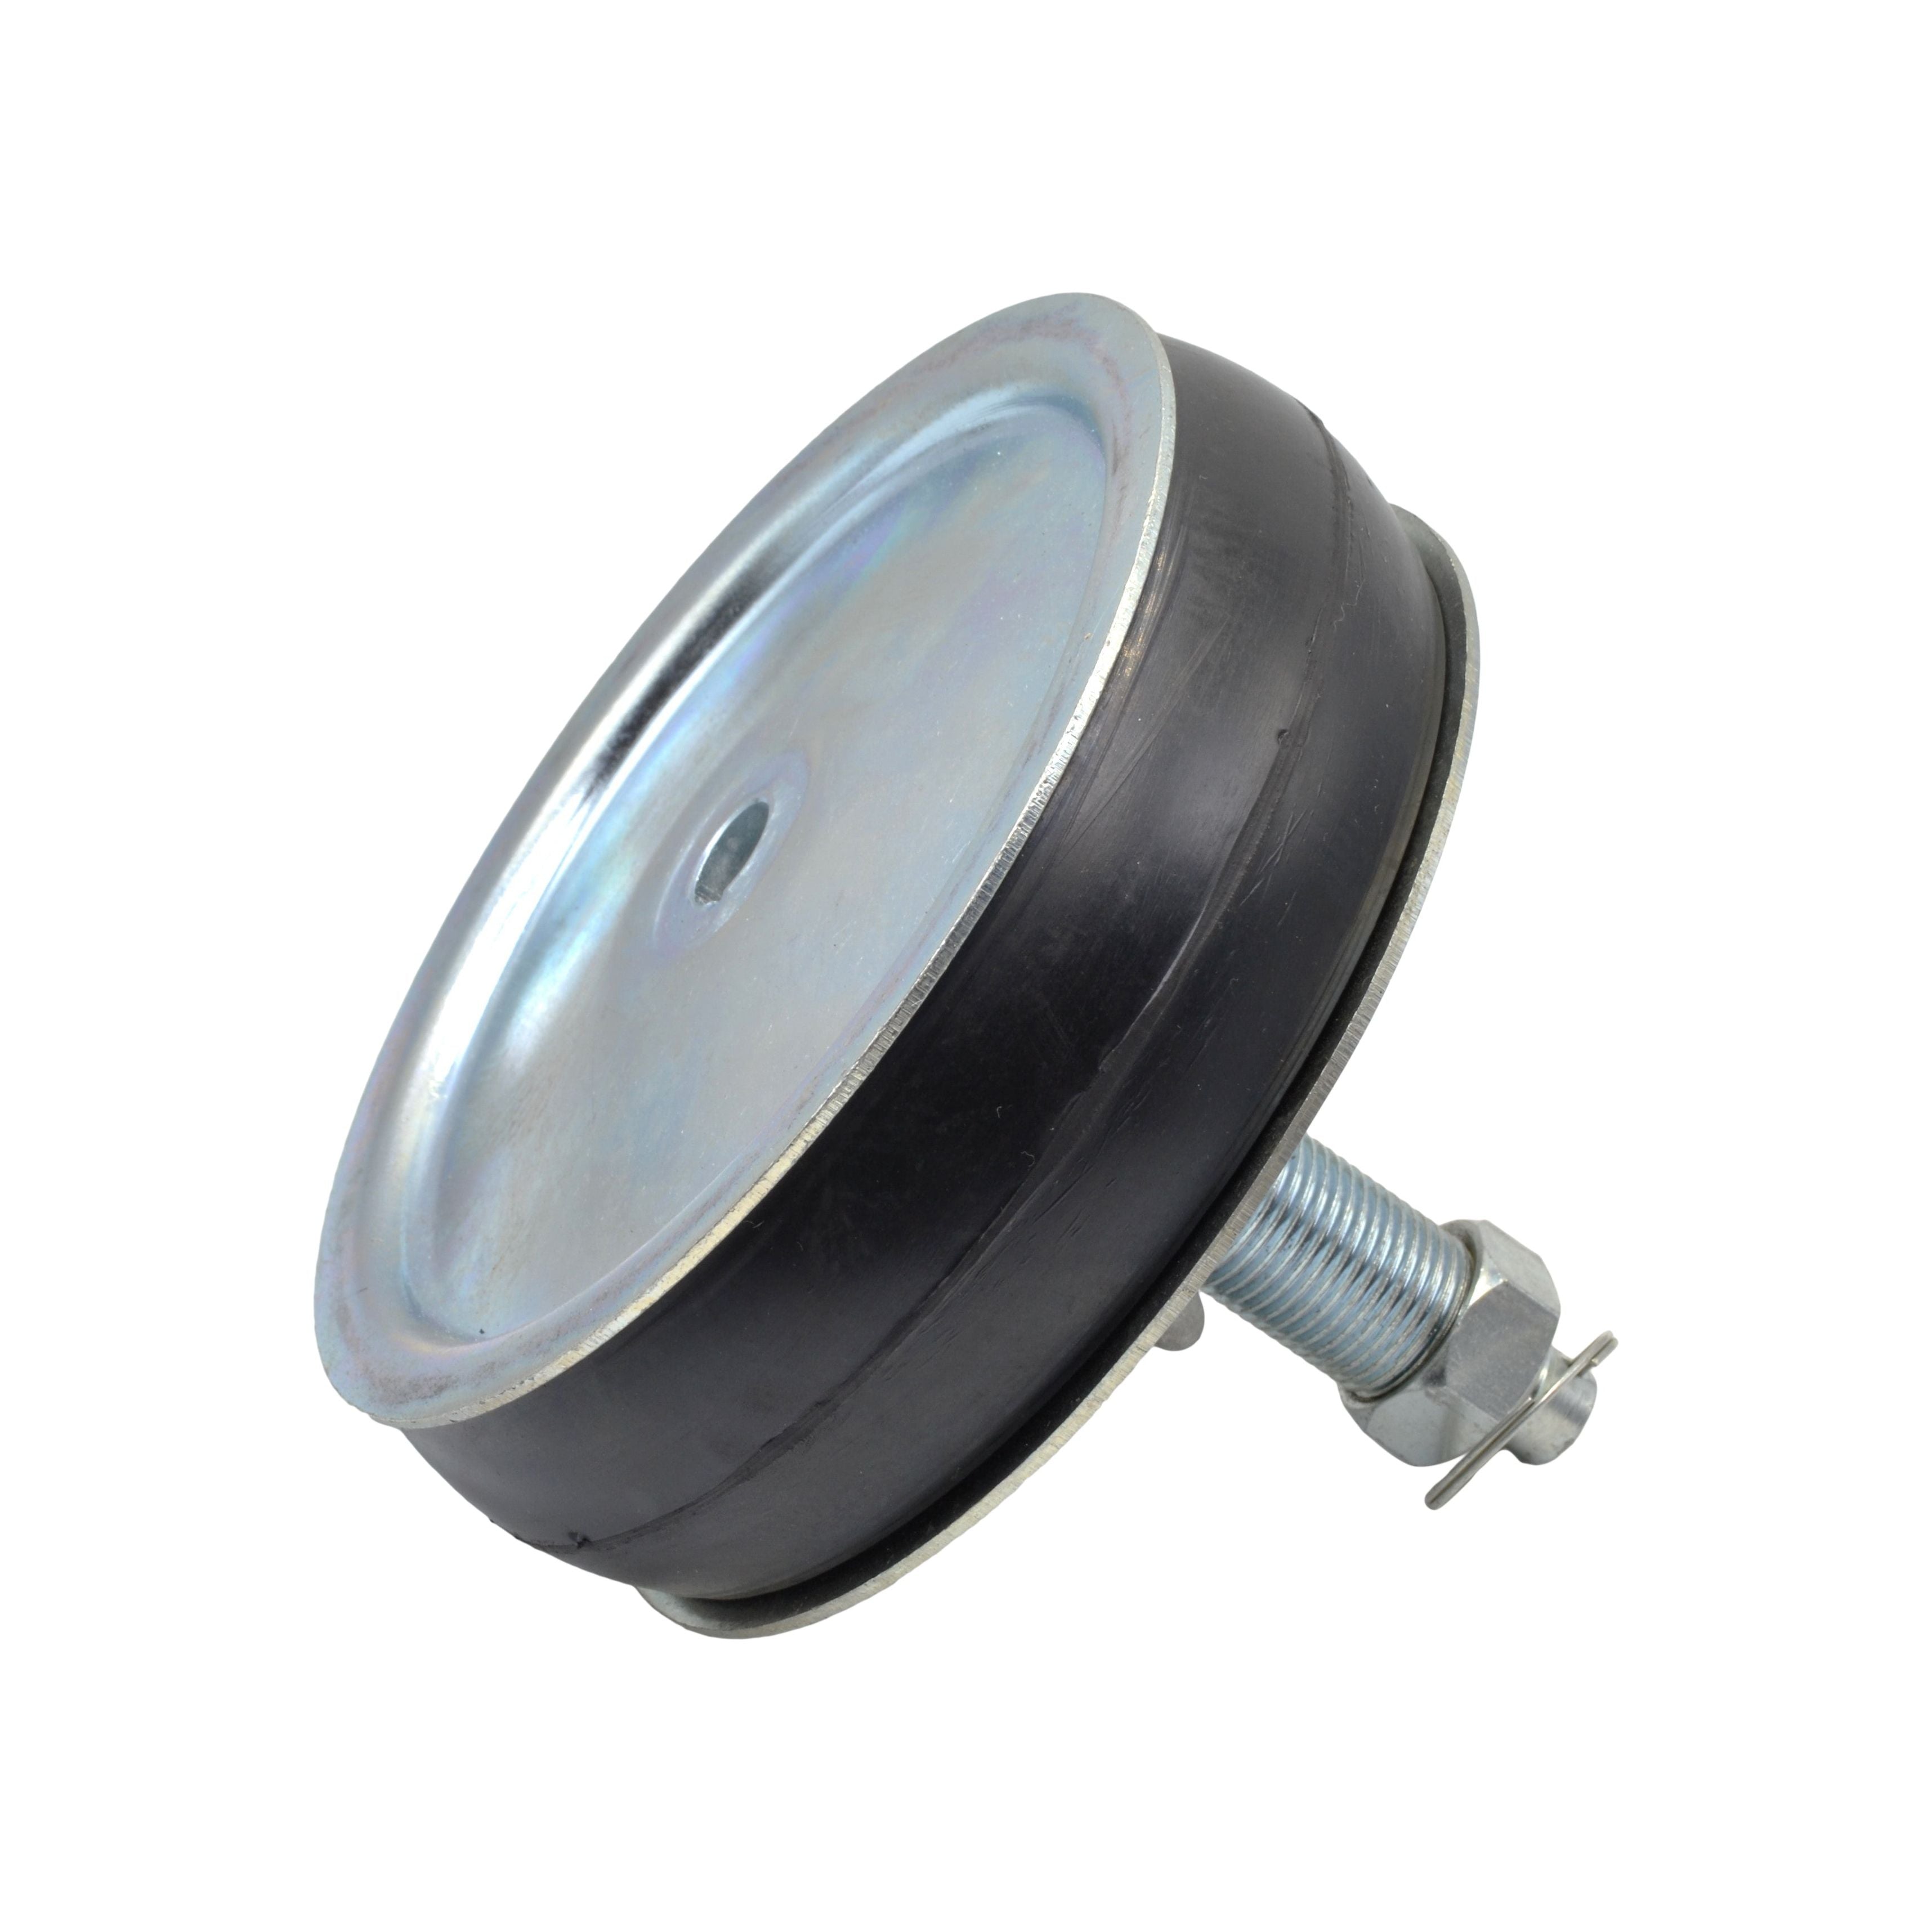 6" 150mm Steel Expanding Plug with 1/2" Bypass 140-165mm Range